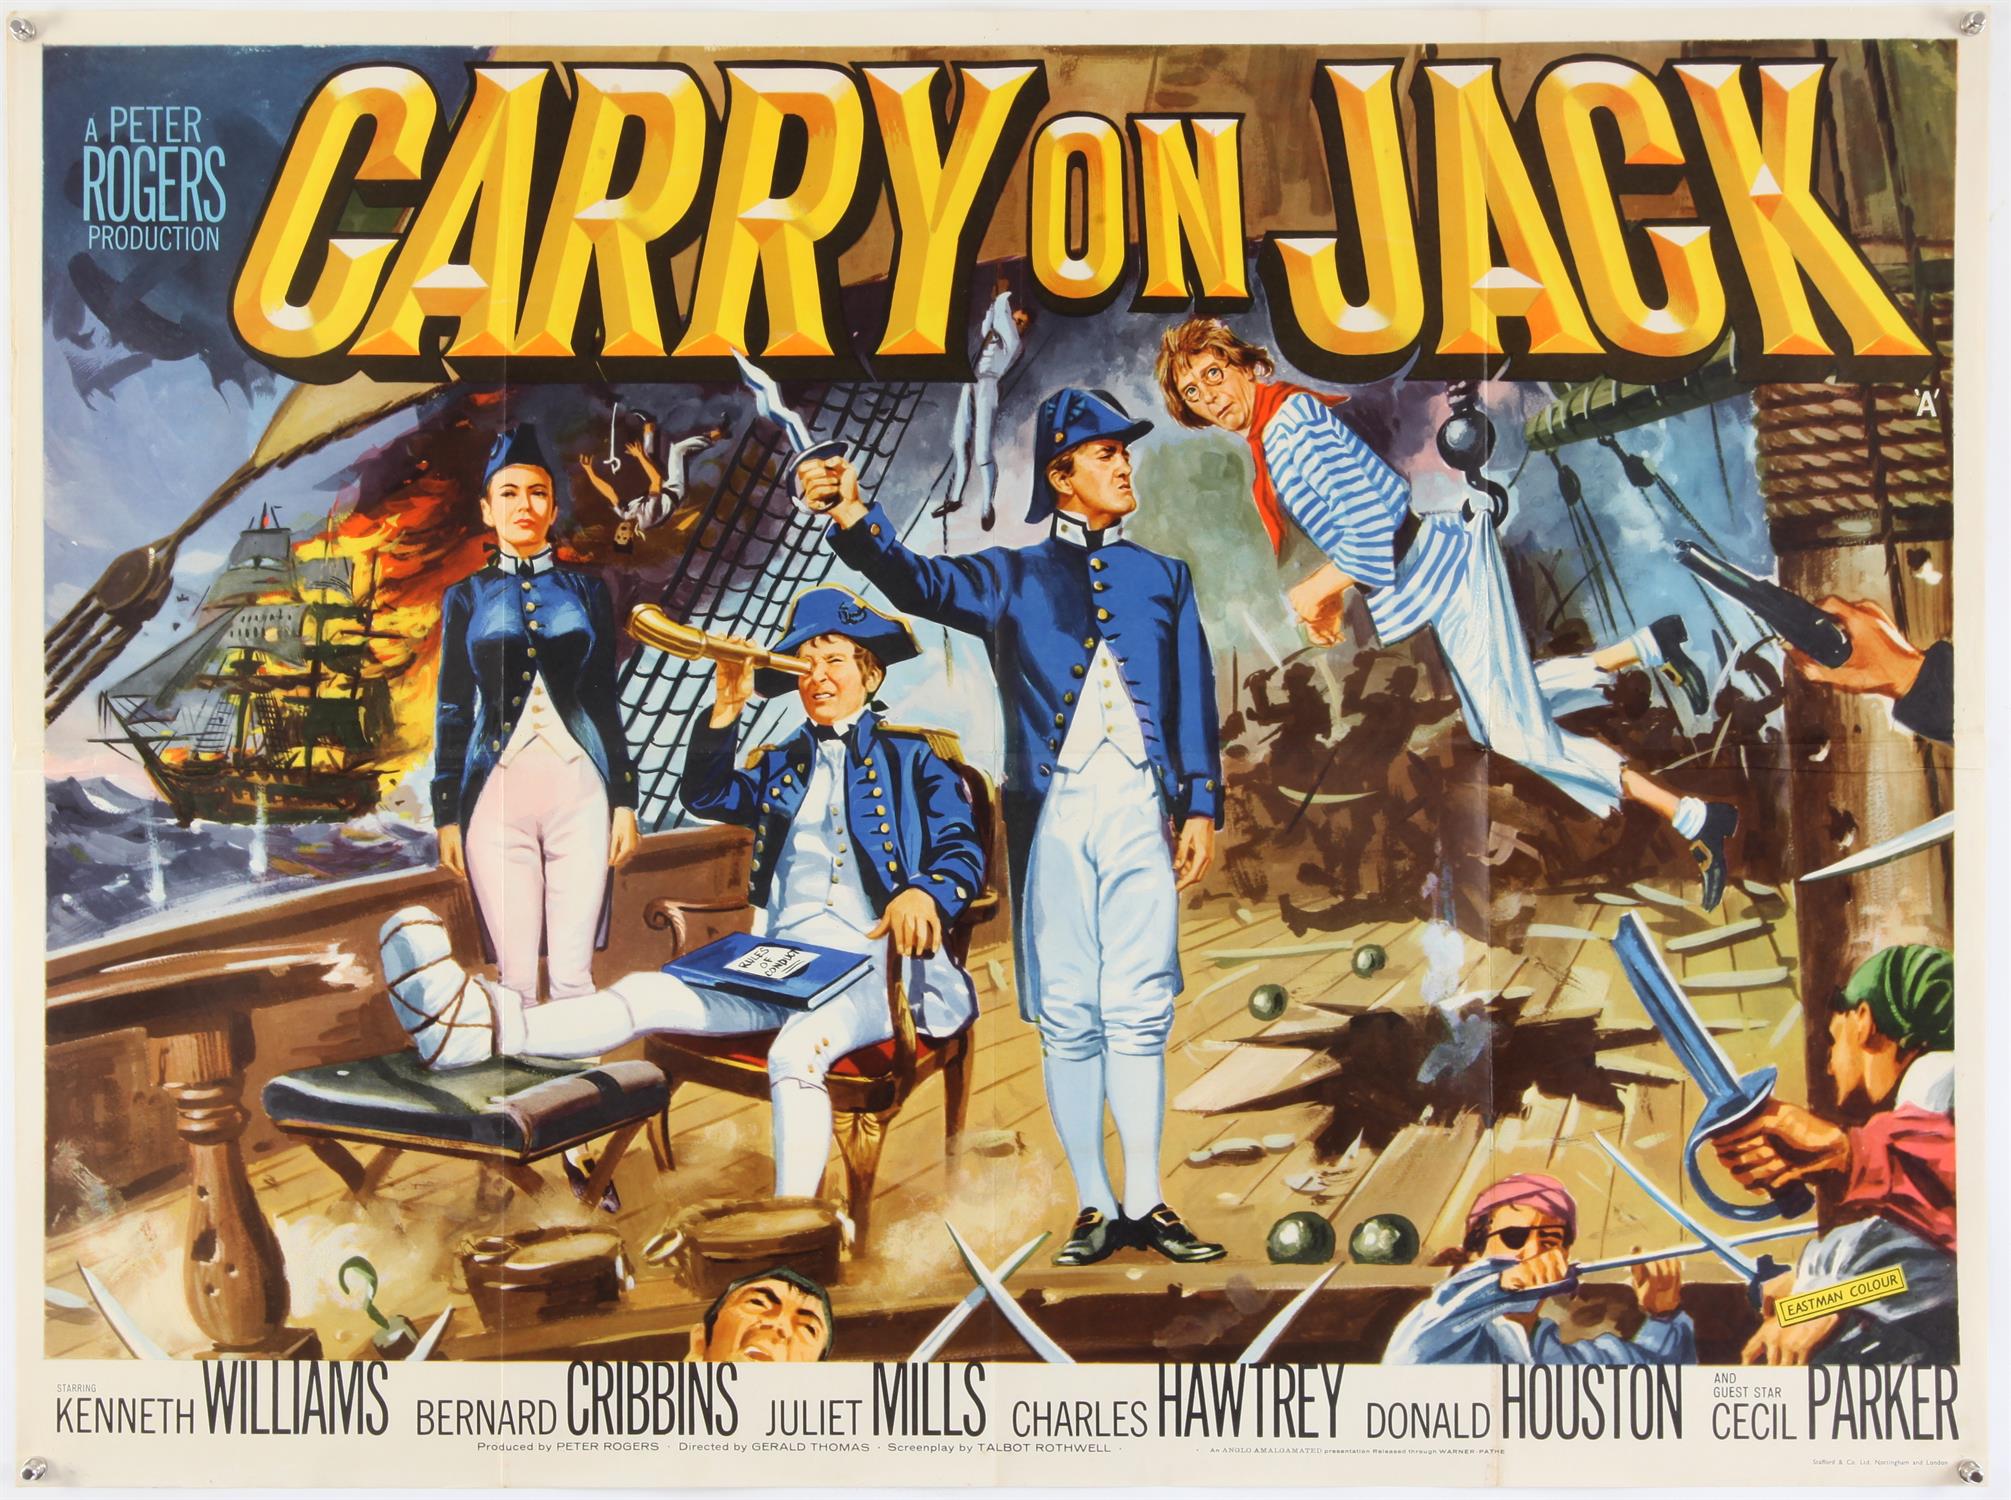 Carry On Jack (1963) British Quad film poster, artwork by Tom Chantrell, folded, 30 x 40 inches. - Image 2 of 3